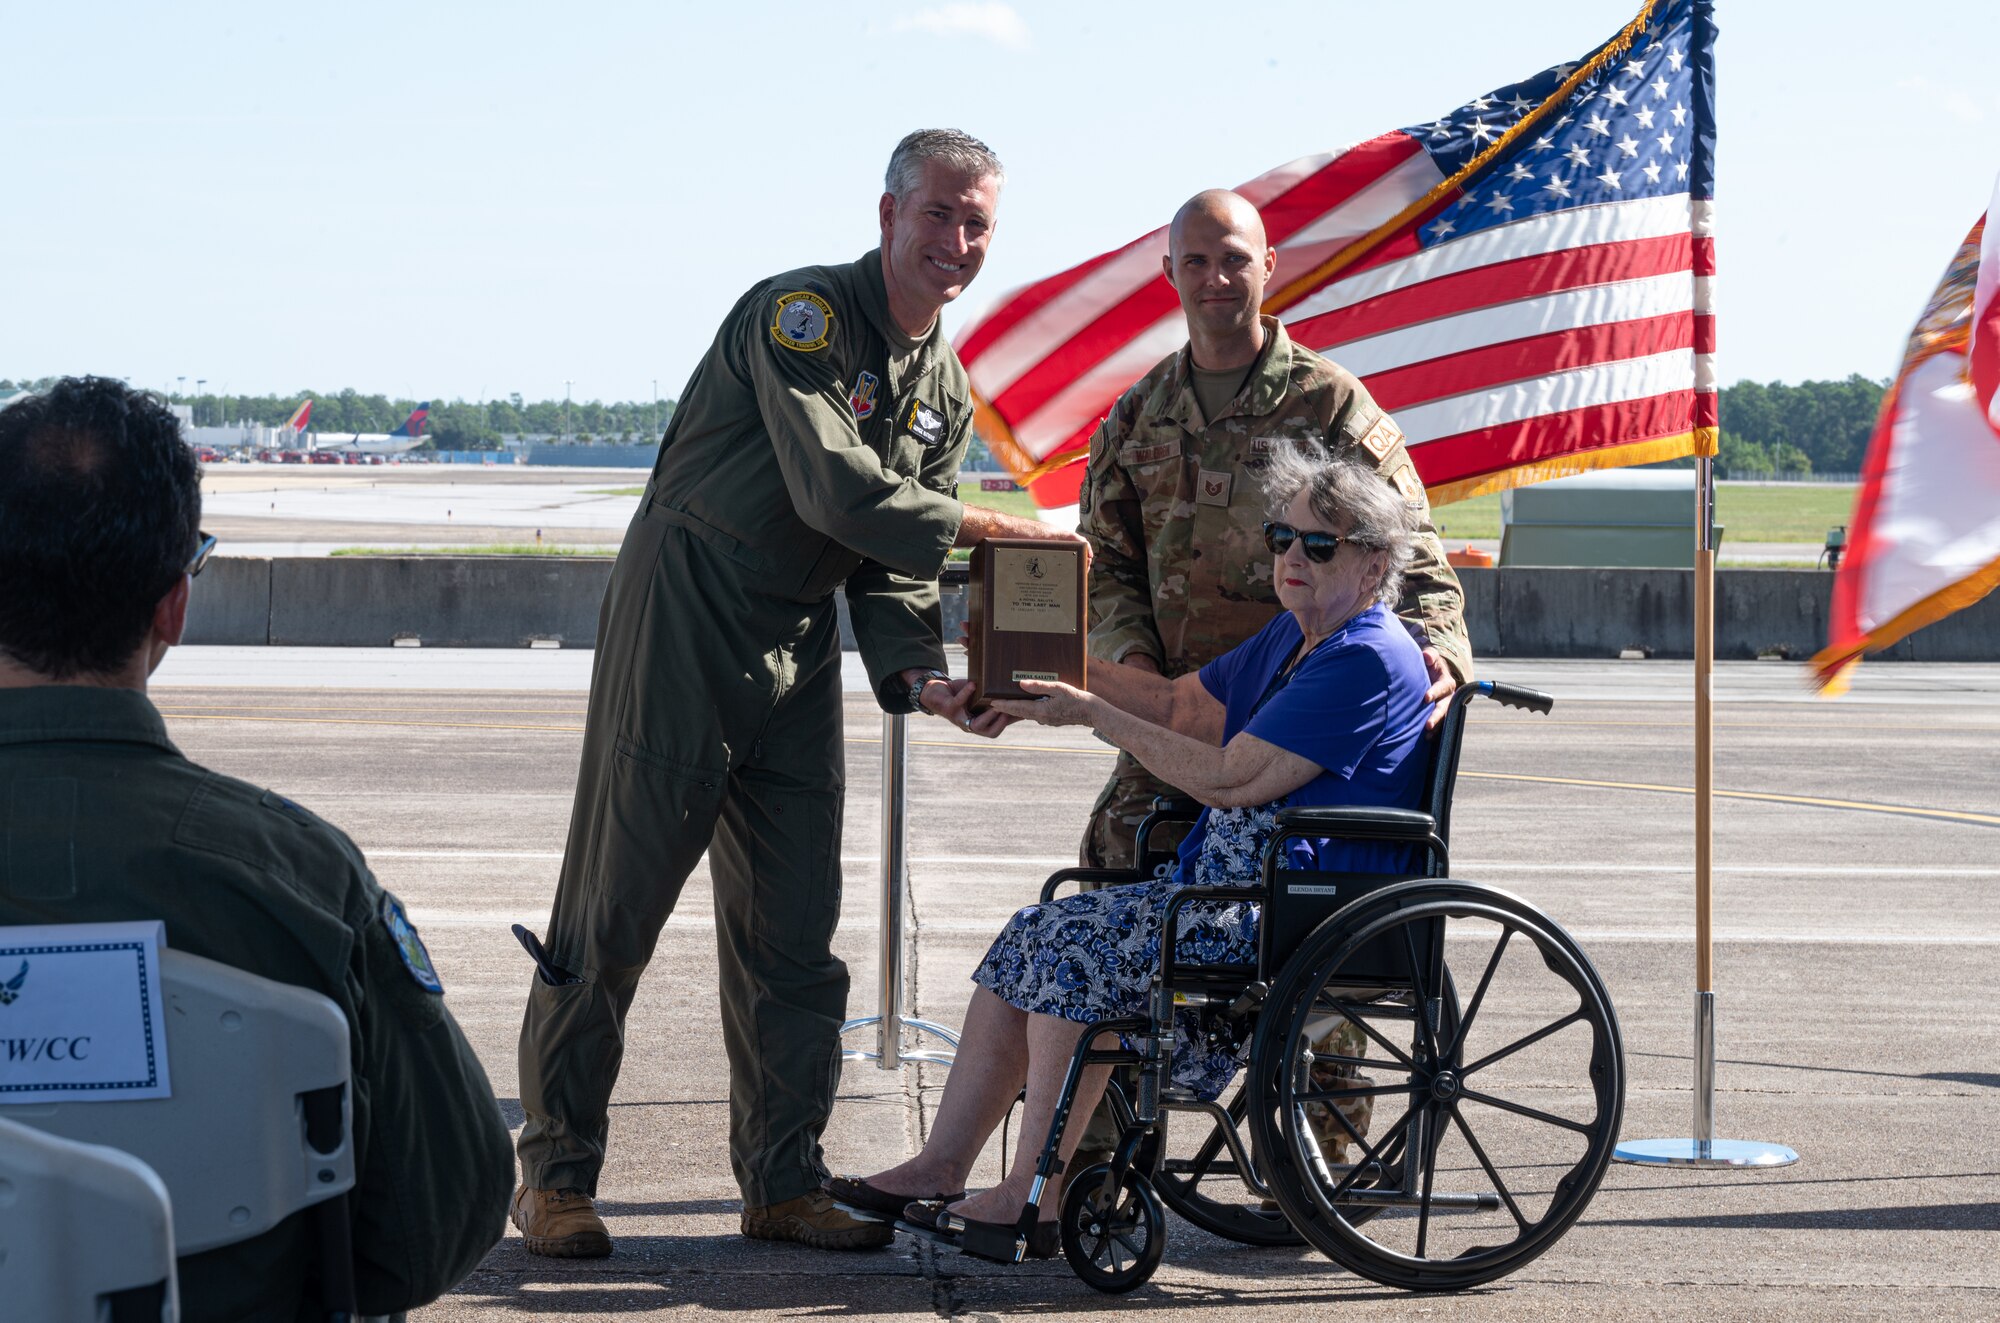 Tyndall's commander accepts a bottle of scotch from a woman in a wheelchair as her grandson stands behind her